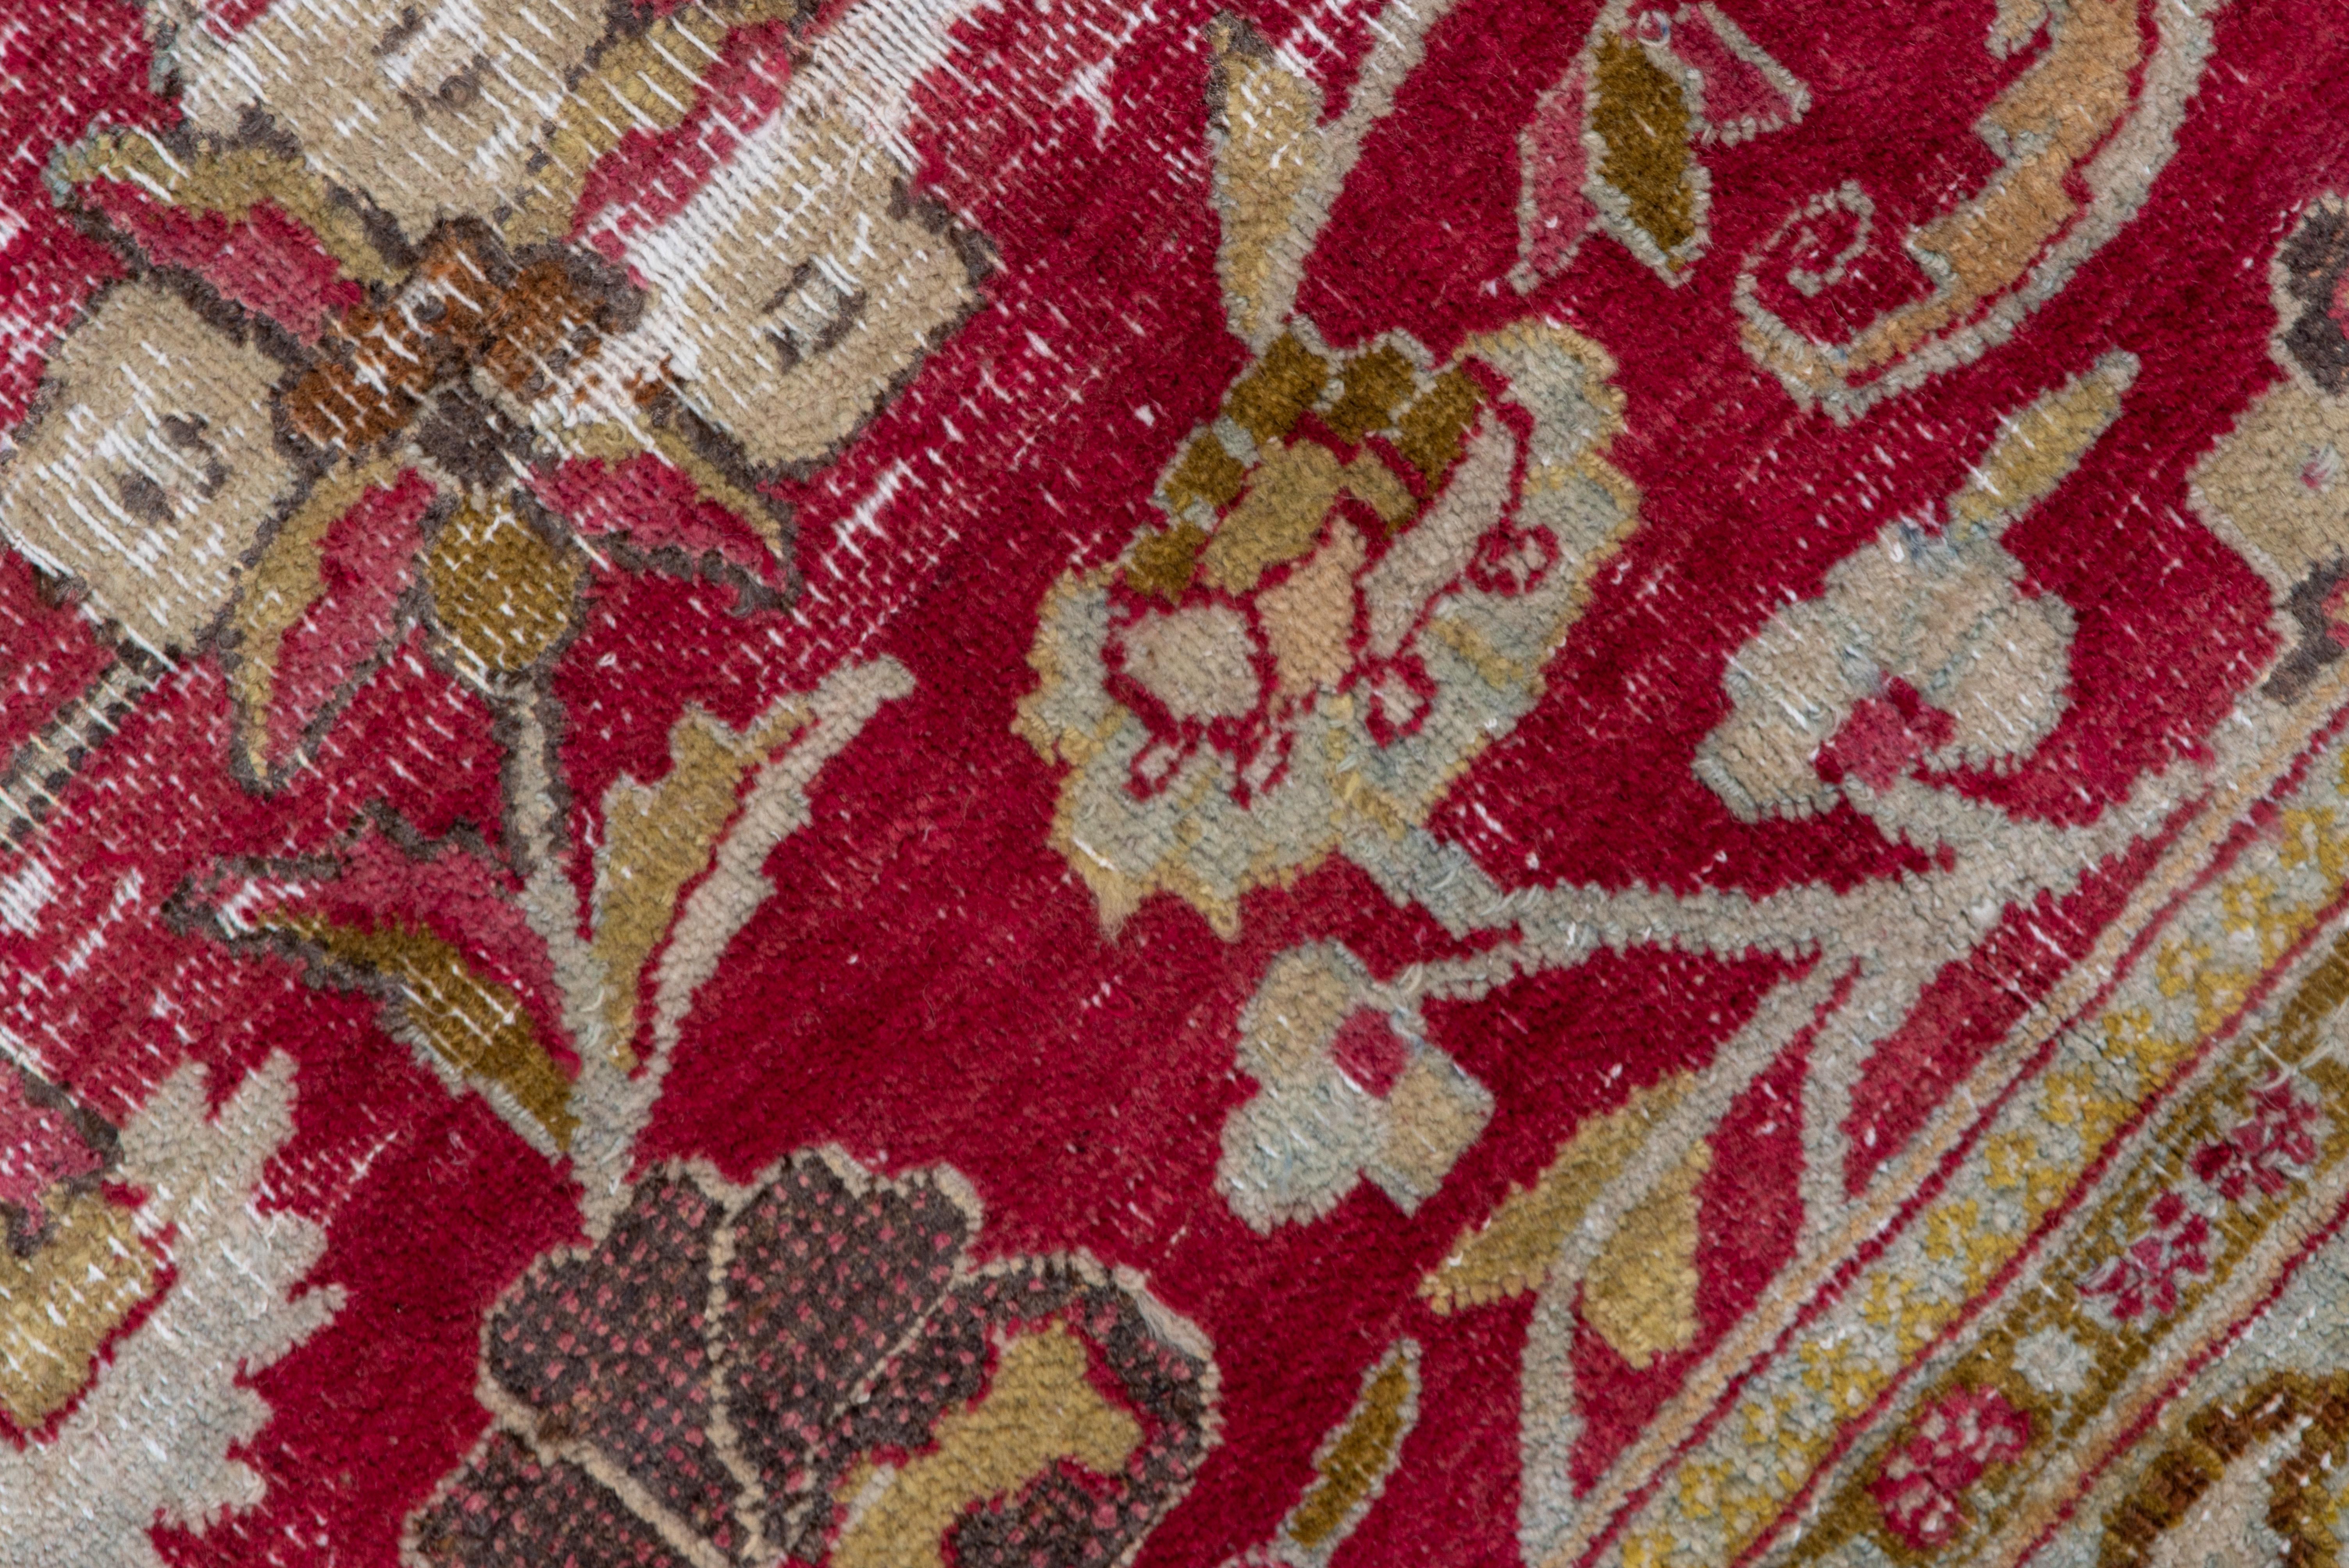 In shabby chic condition, this NE Persian urban scatter show an abrashed cochineal raspberry field with a leaf, lotus palmette and springy vine pattern, accented in yellow, ecru and green, Seafoam and olive border with swimming botehs. Medium weave